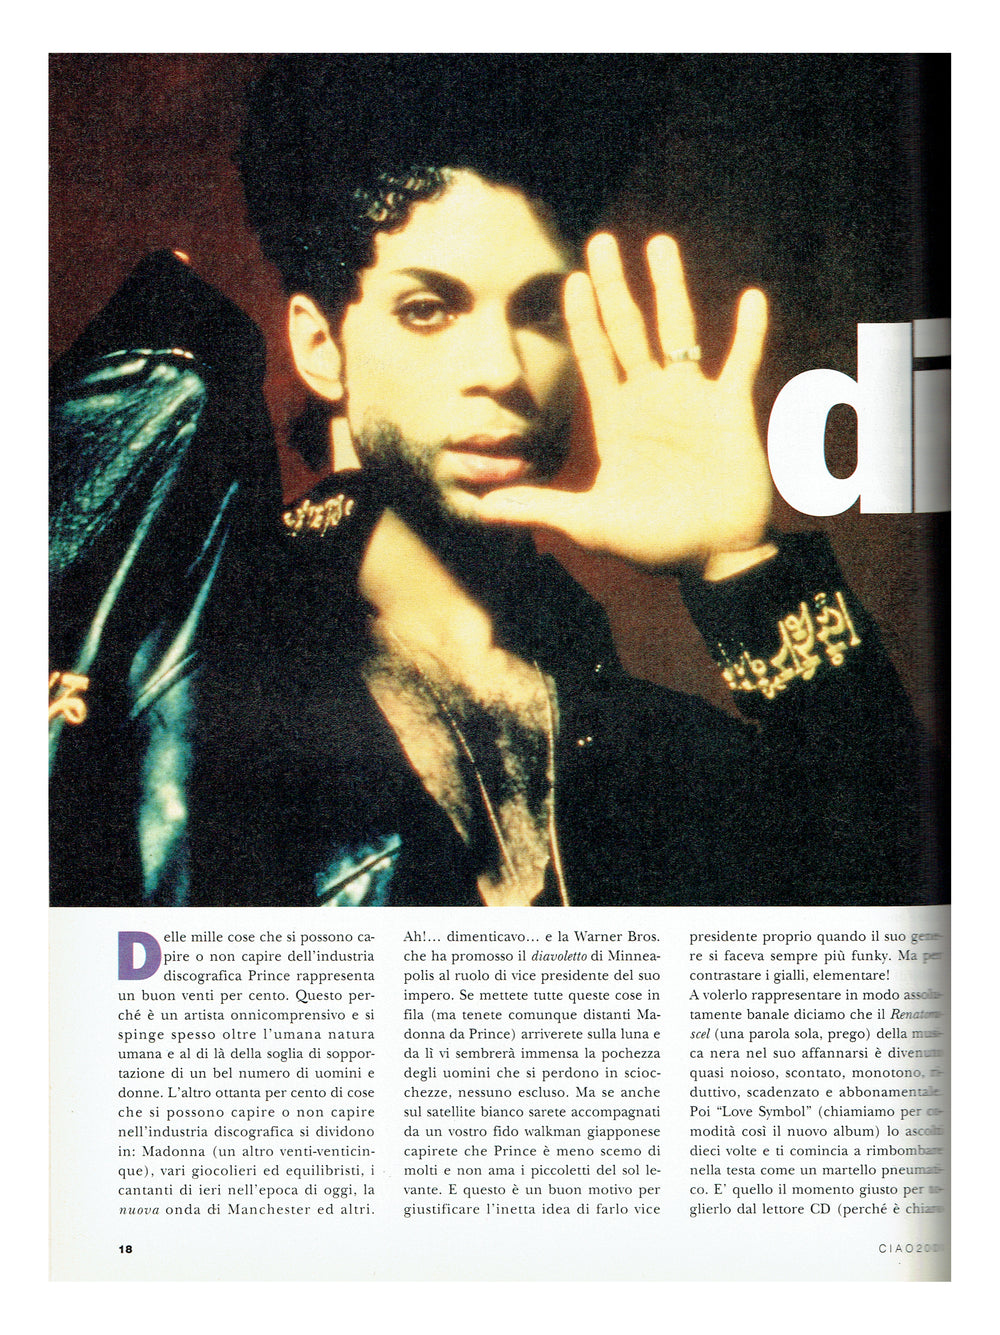 Prince CIAO December 1992 Italian Magazine Cover And 4 Page Article EX